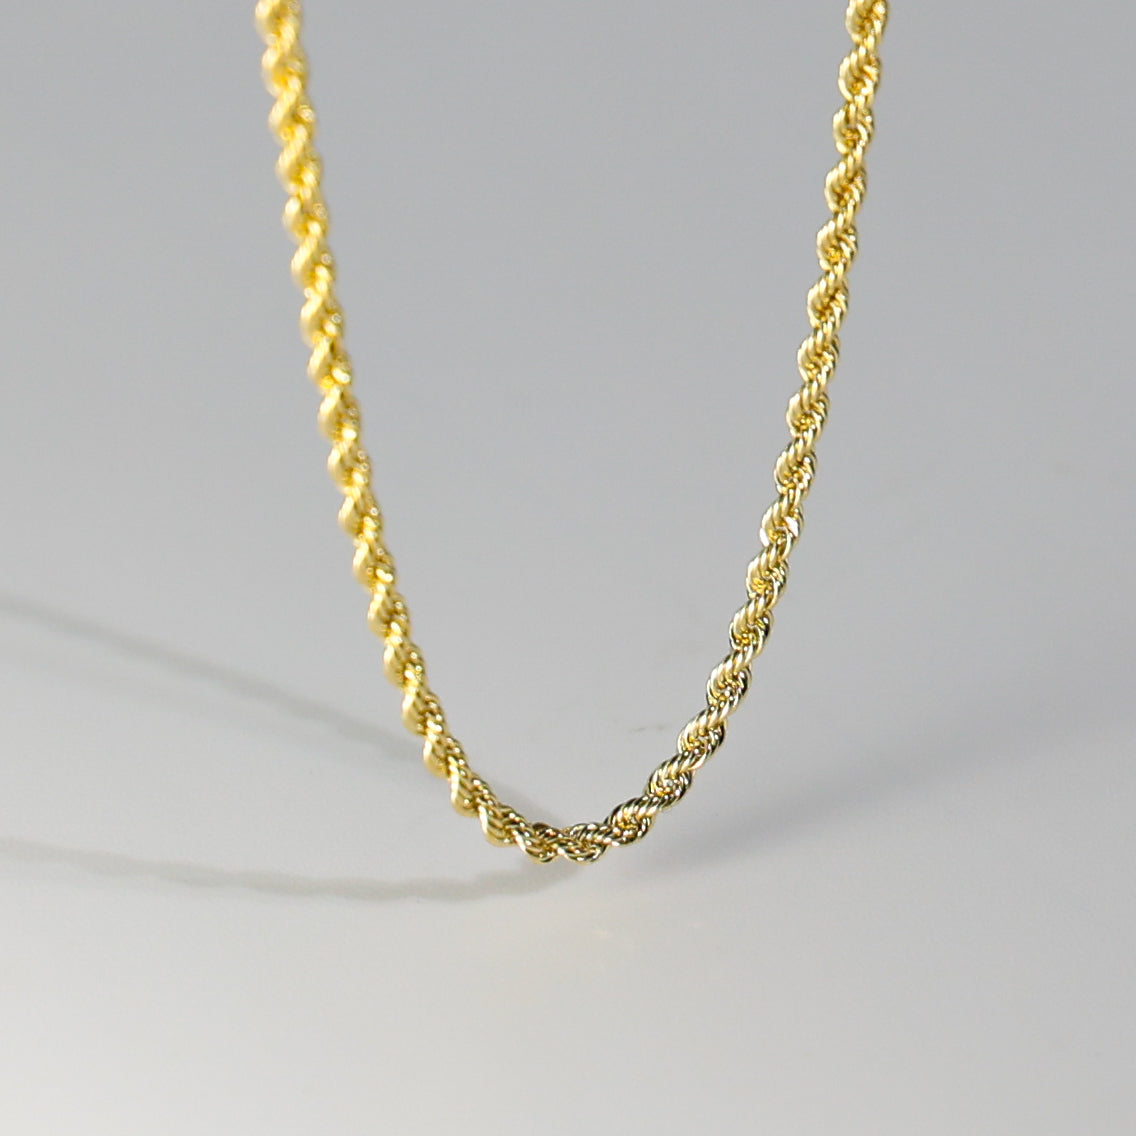 Gold 1.8mm Hollow Rope Chain Model-0437 - Charlie & Co. Jewelry